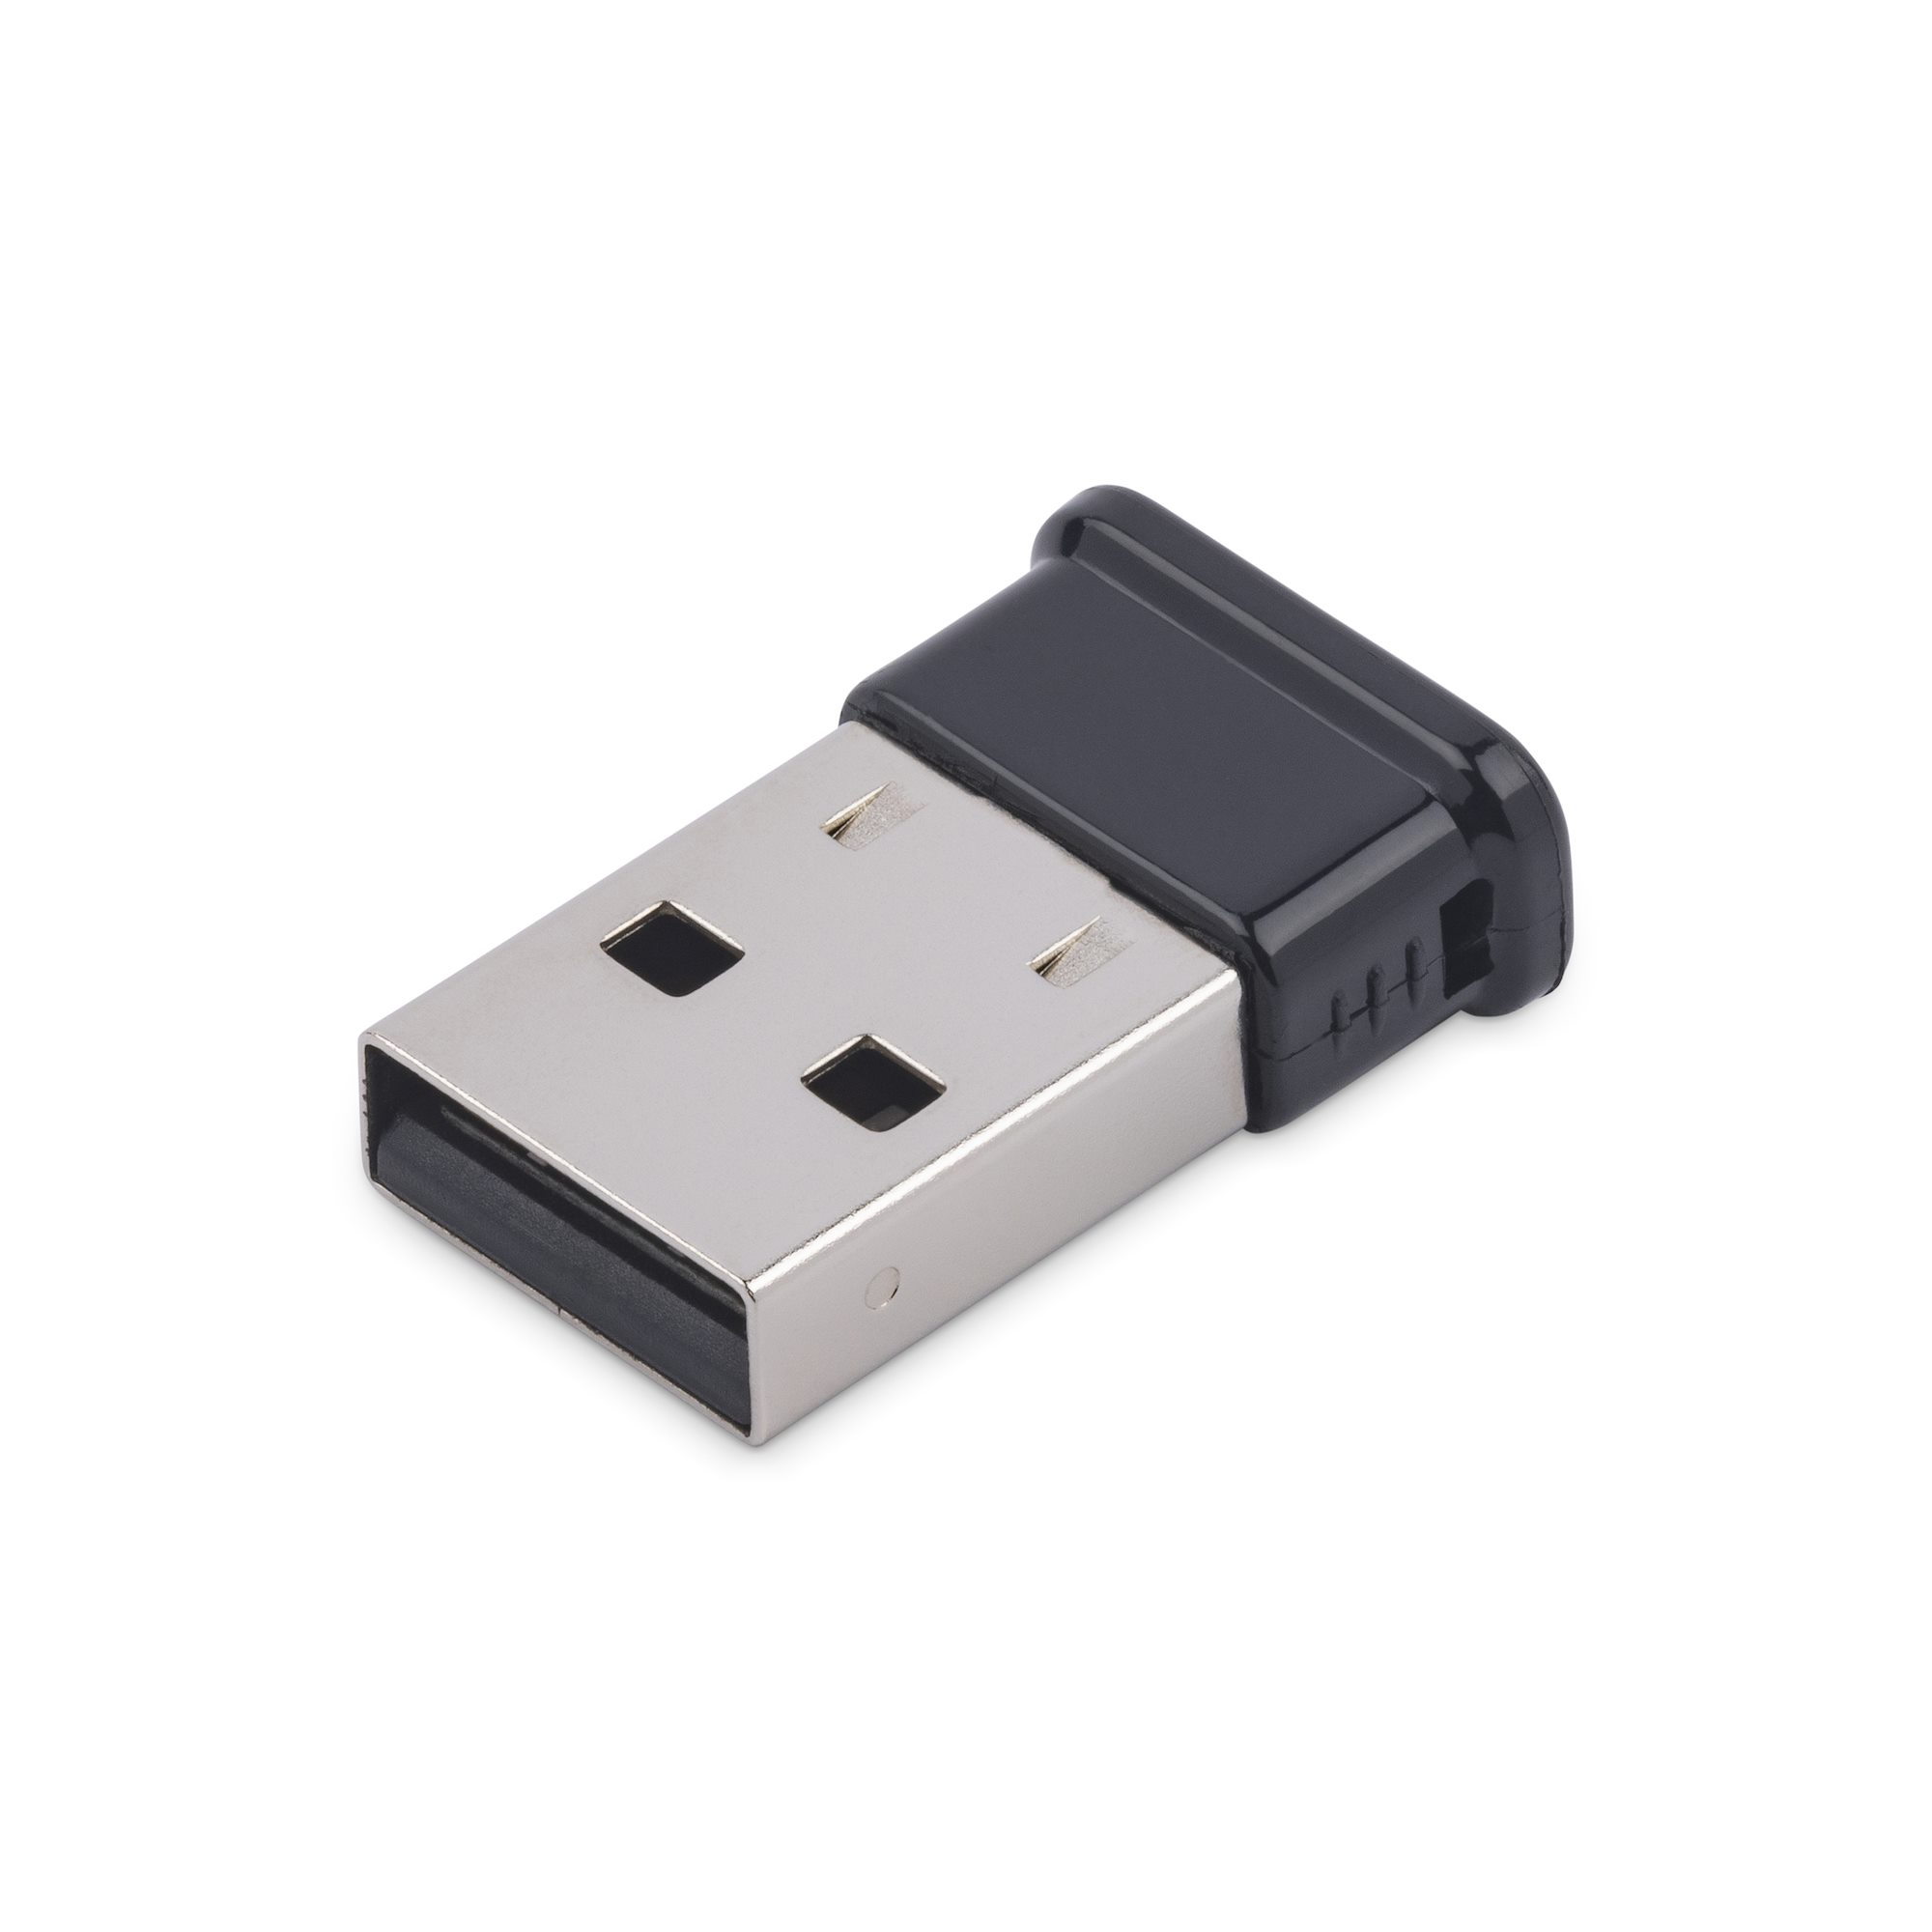 Wireless bluetooth 100m USB 2.0 Dongle Adapter for Computer PC Laptop 